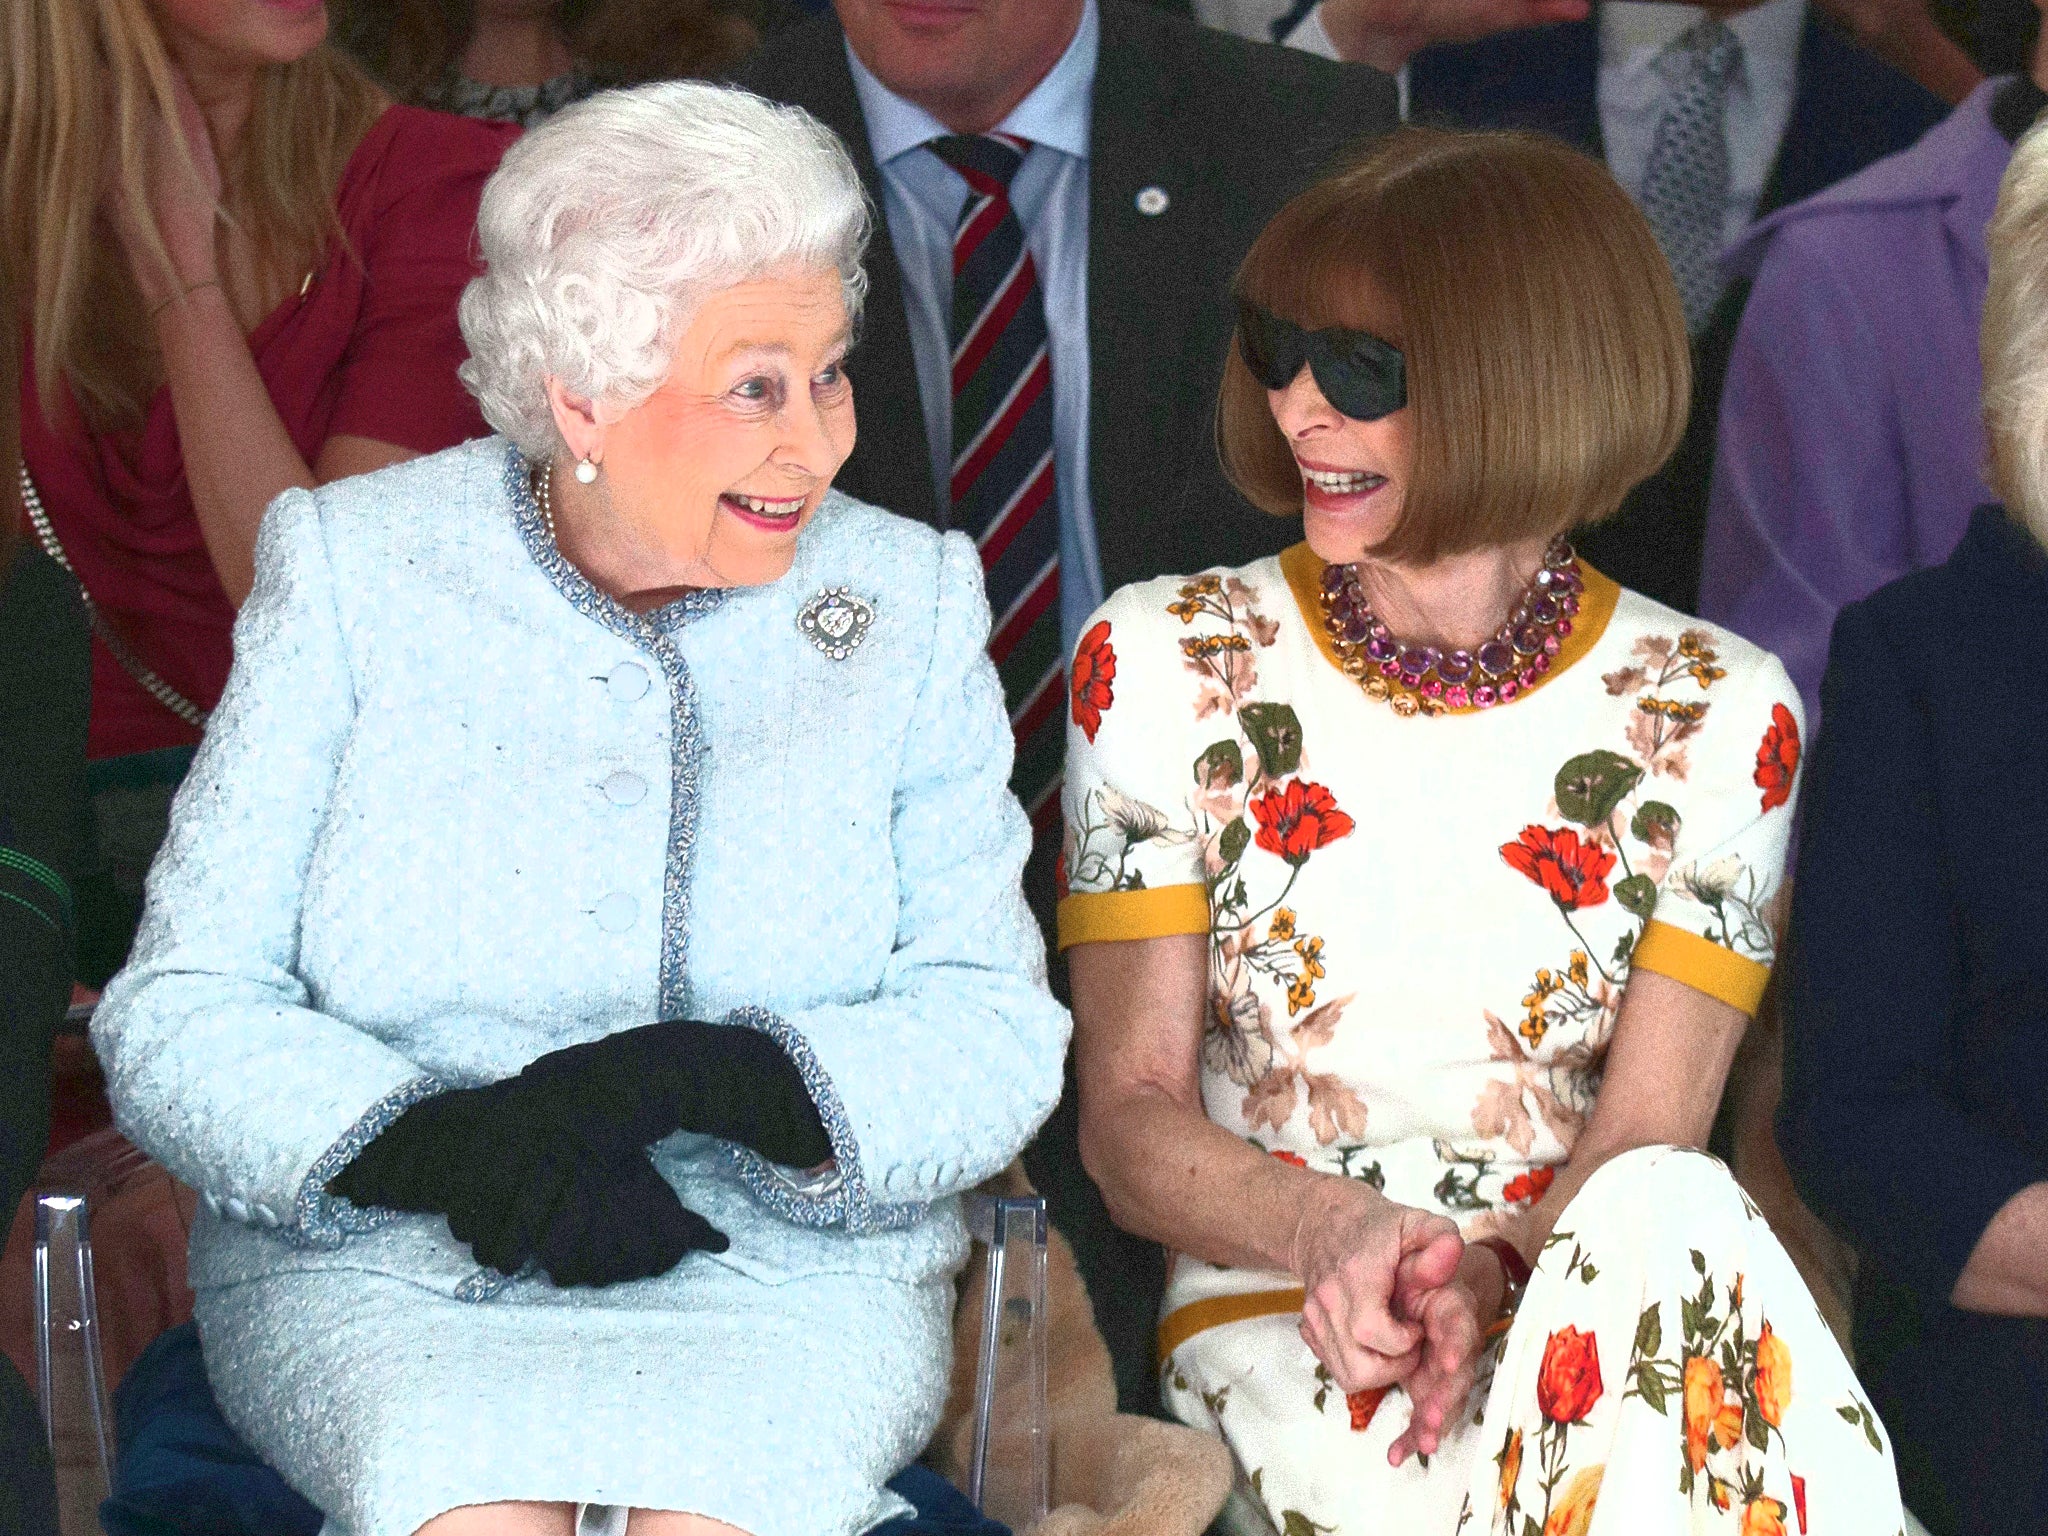 Queen Elizabeth II and ‘Vogue’ editor Anna Wintour at Richard Quinn’s runway show during London Fashion Week 2018